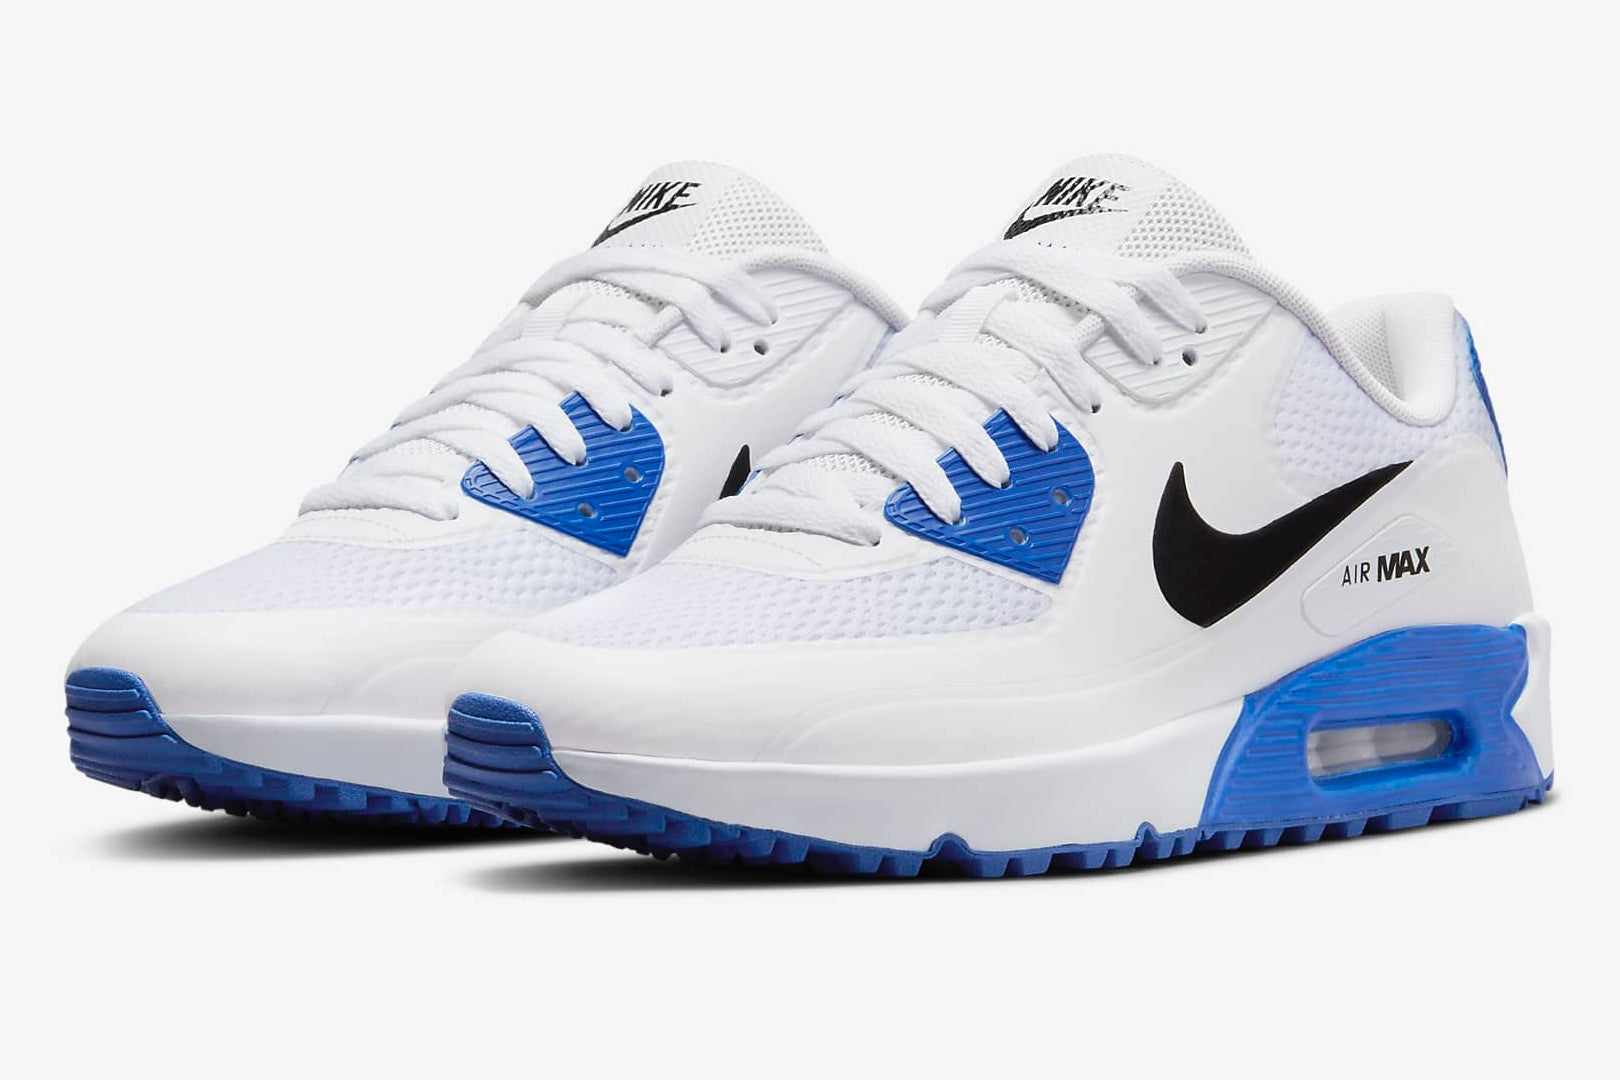 This Nike Air Max 90 Ultra Essential Is A Great Choice For The